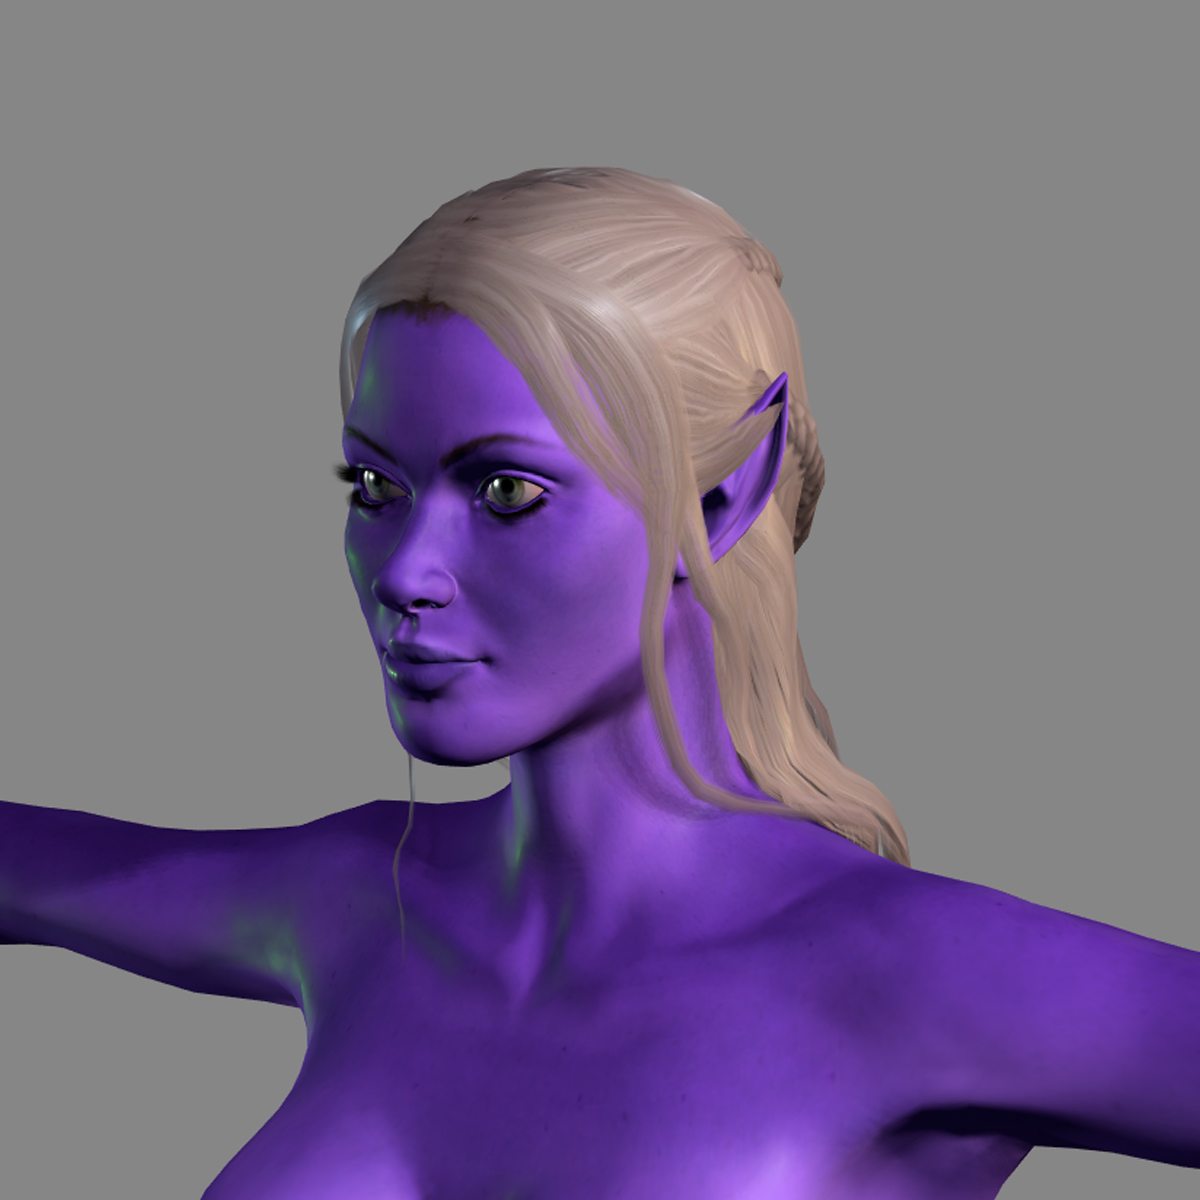 Animated Naked Elf WomanRigged 3d Game Character